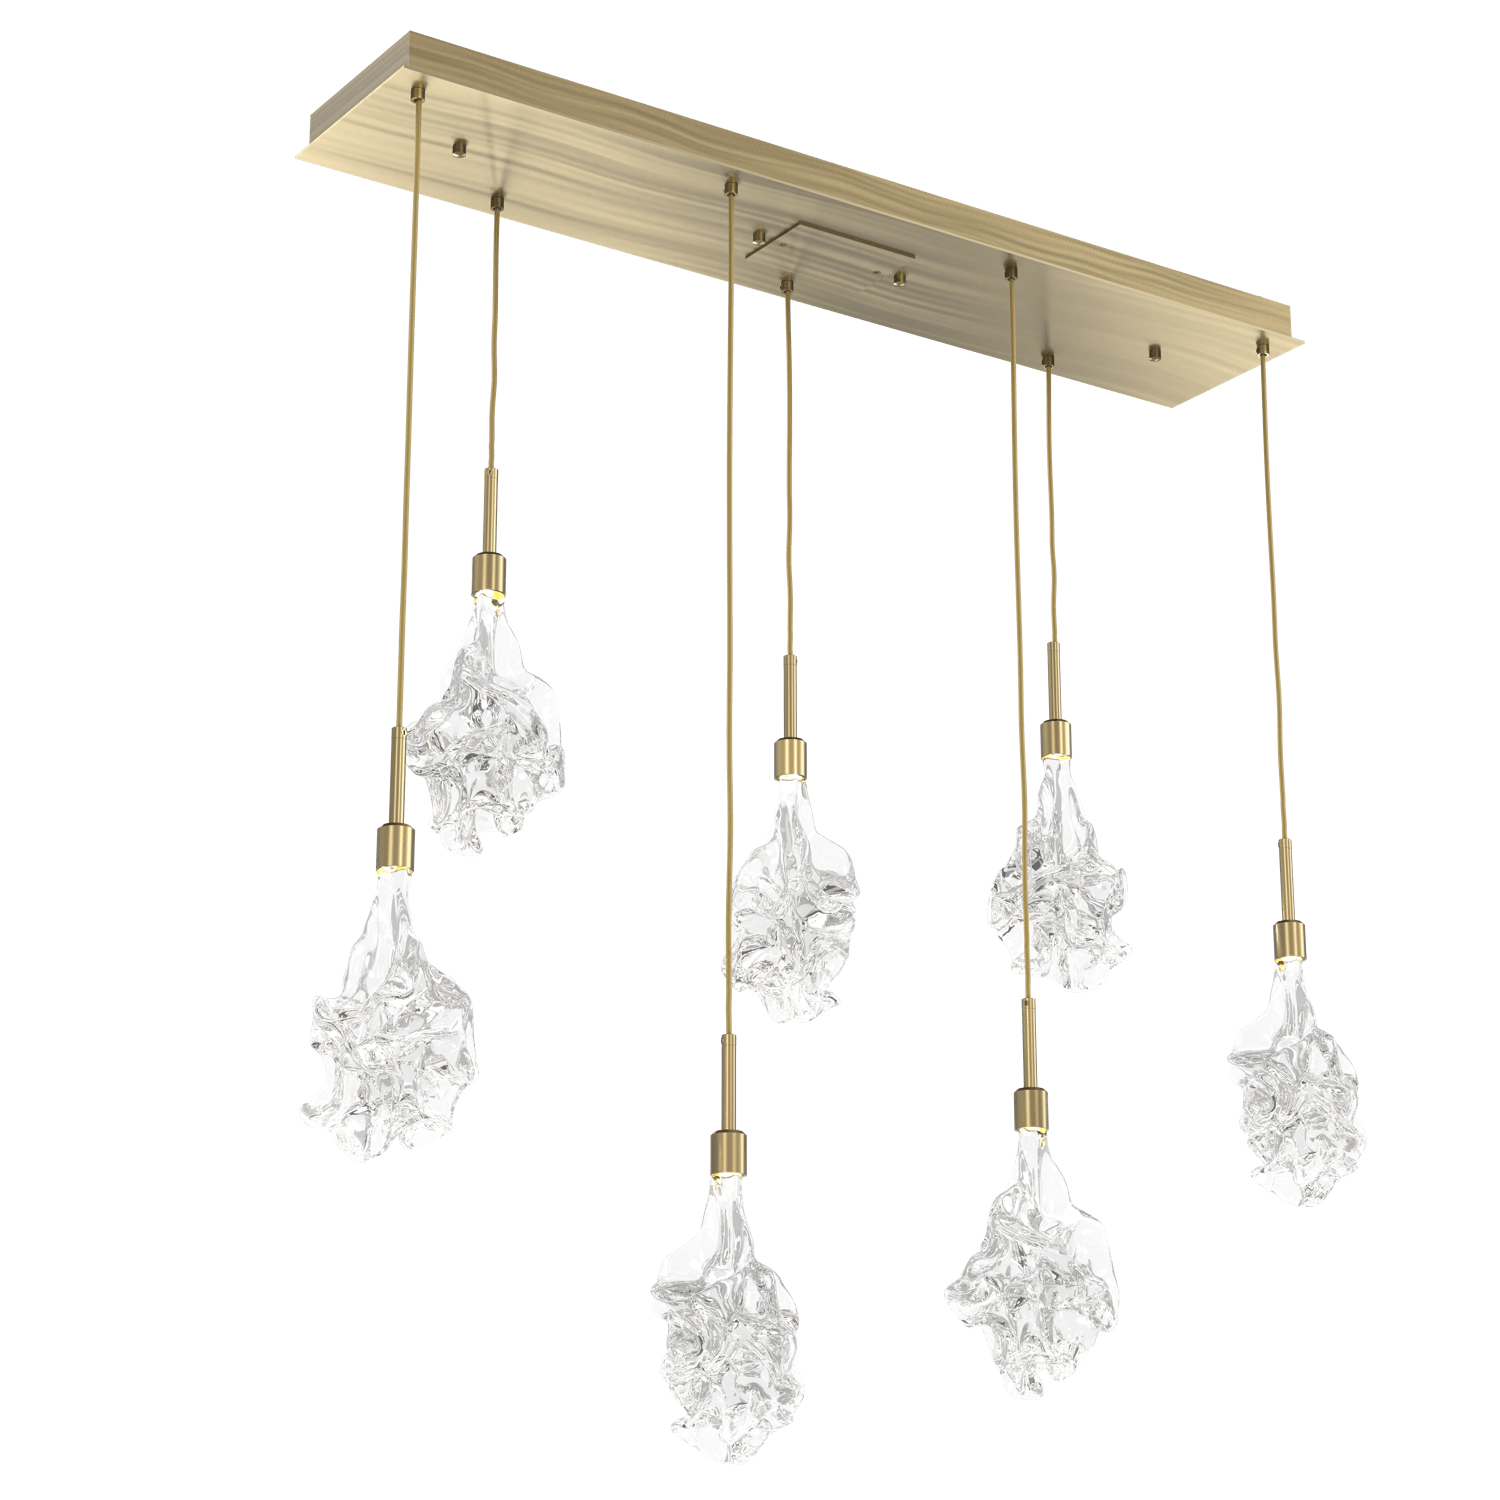 PLB0059-07-HB-Hammerton-Studio-Blossom-7-light-linear-pendant-chandelier-with-heritage-brass-finish-and-clear-handblown-crystal-glass-shades-and-LED-lamping